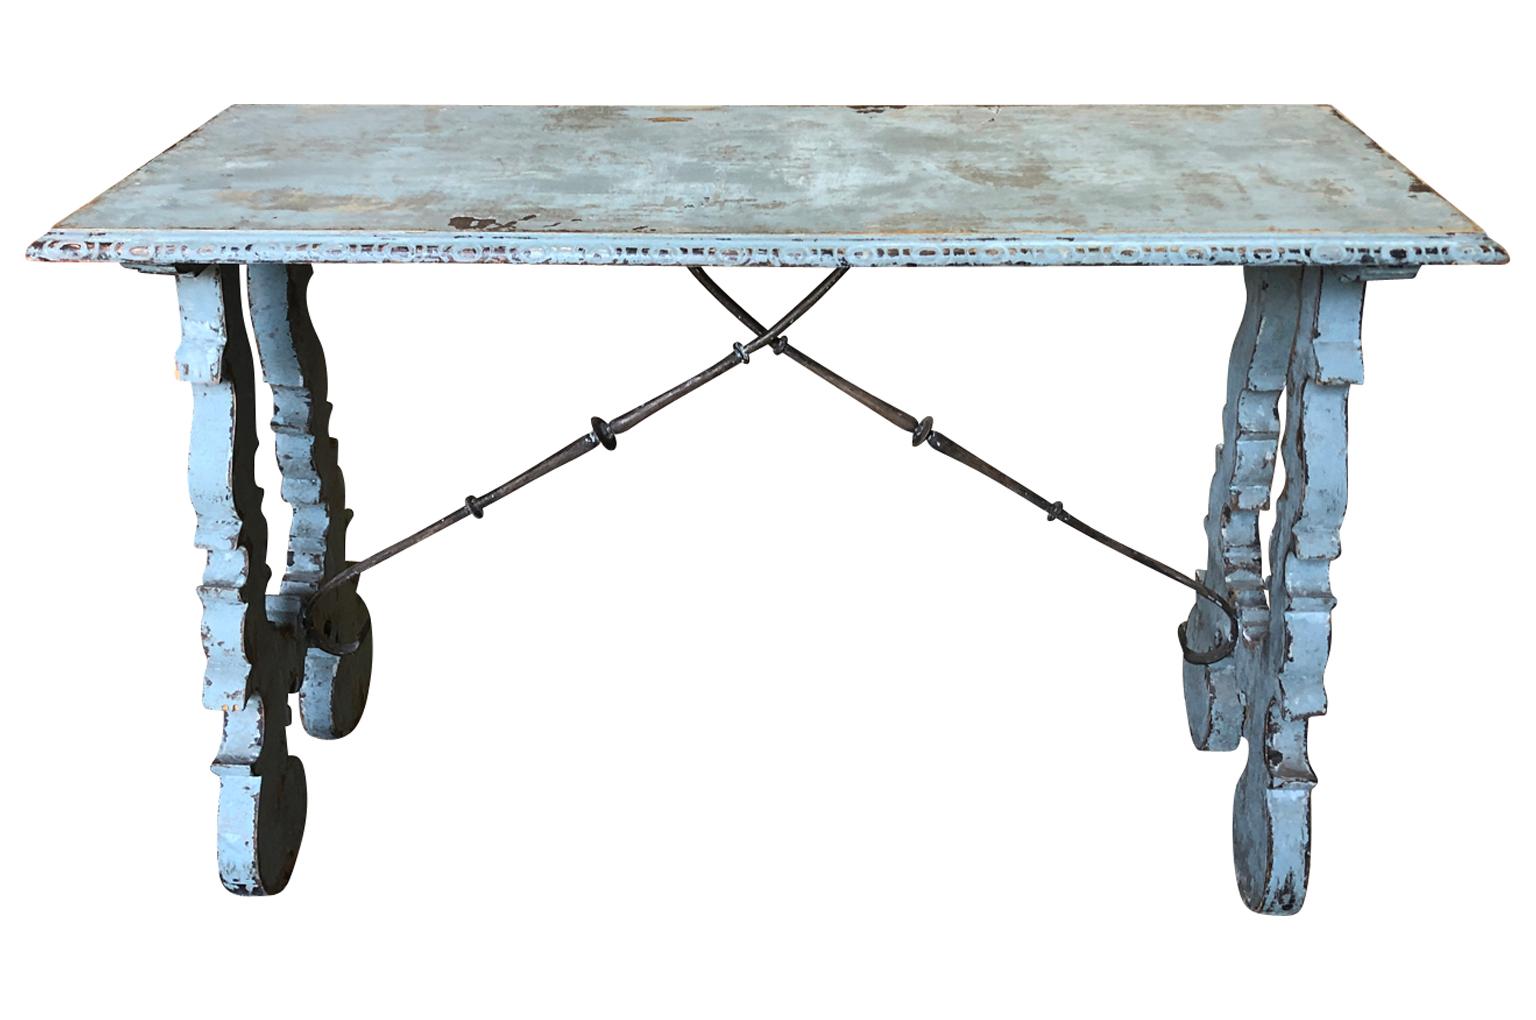 A very charming later 19th century console table from the Catalan region of Spain. Handsomely constructed from painted wood with classical lyre shaped legs and iron stretchers. A wonderful accent piece.